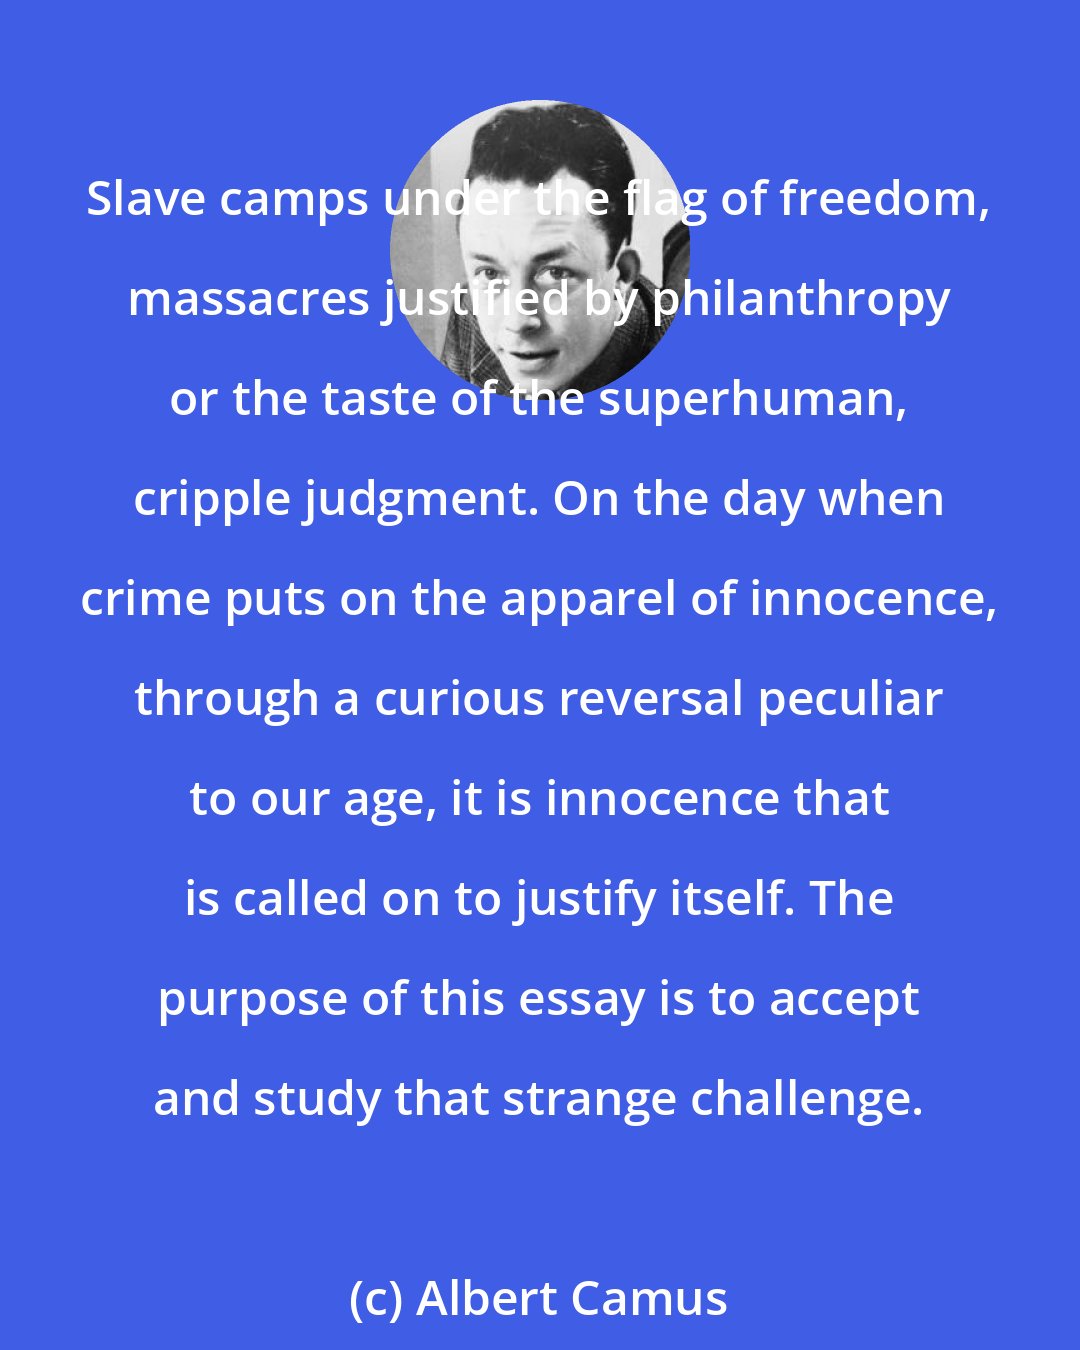 Albert Camus: Slave camps under the flag of freedom, massacres justified by philanthropy or the taste of the superhuman, cripple judgment. On the day when crime puts on the apparel of innocence, through a curious reversal peculiar to our age, it is innocence that is called on to justify itself. The purpose of this essay is to accept and study that strange challenge.